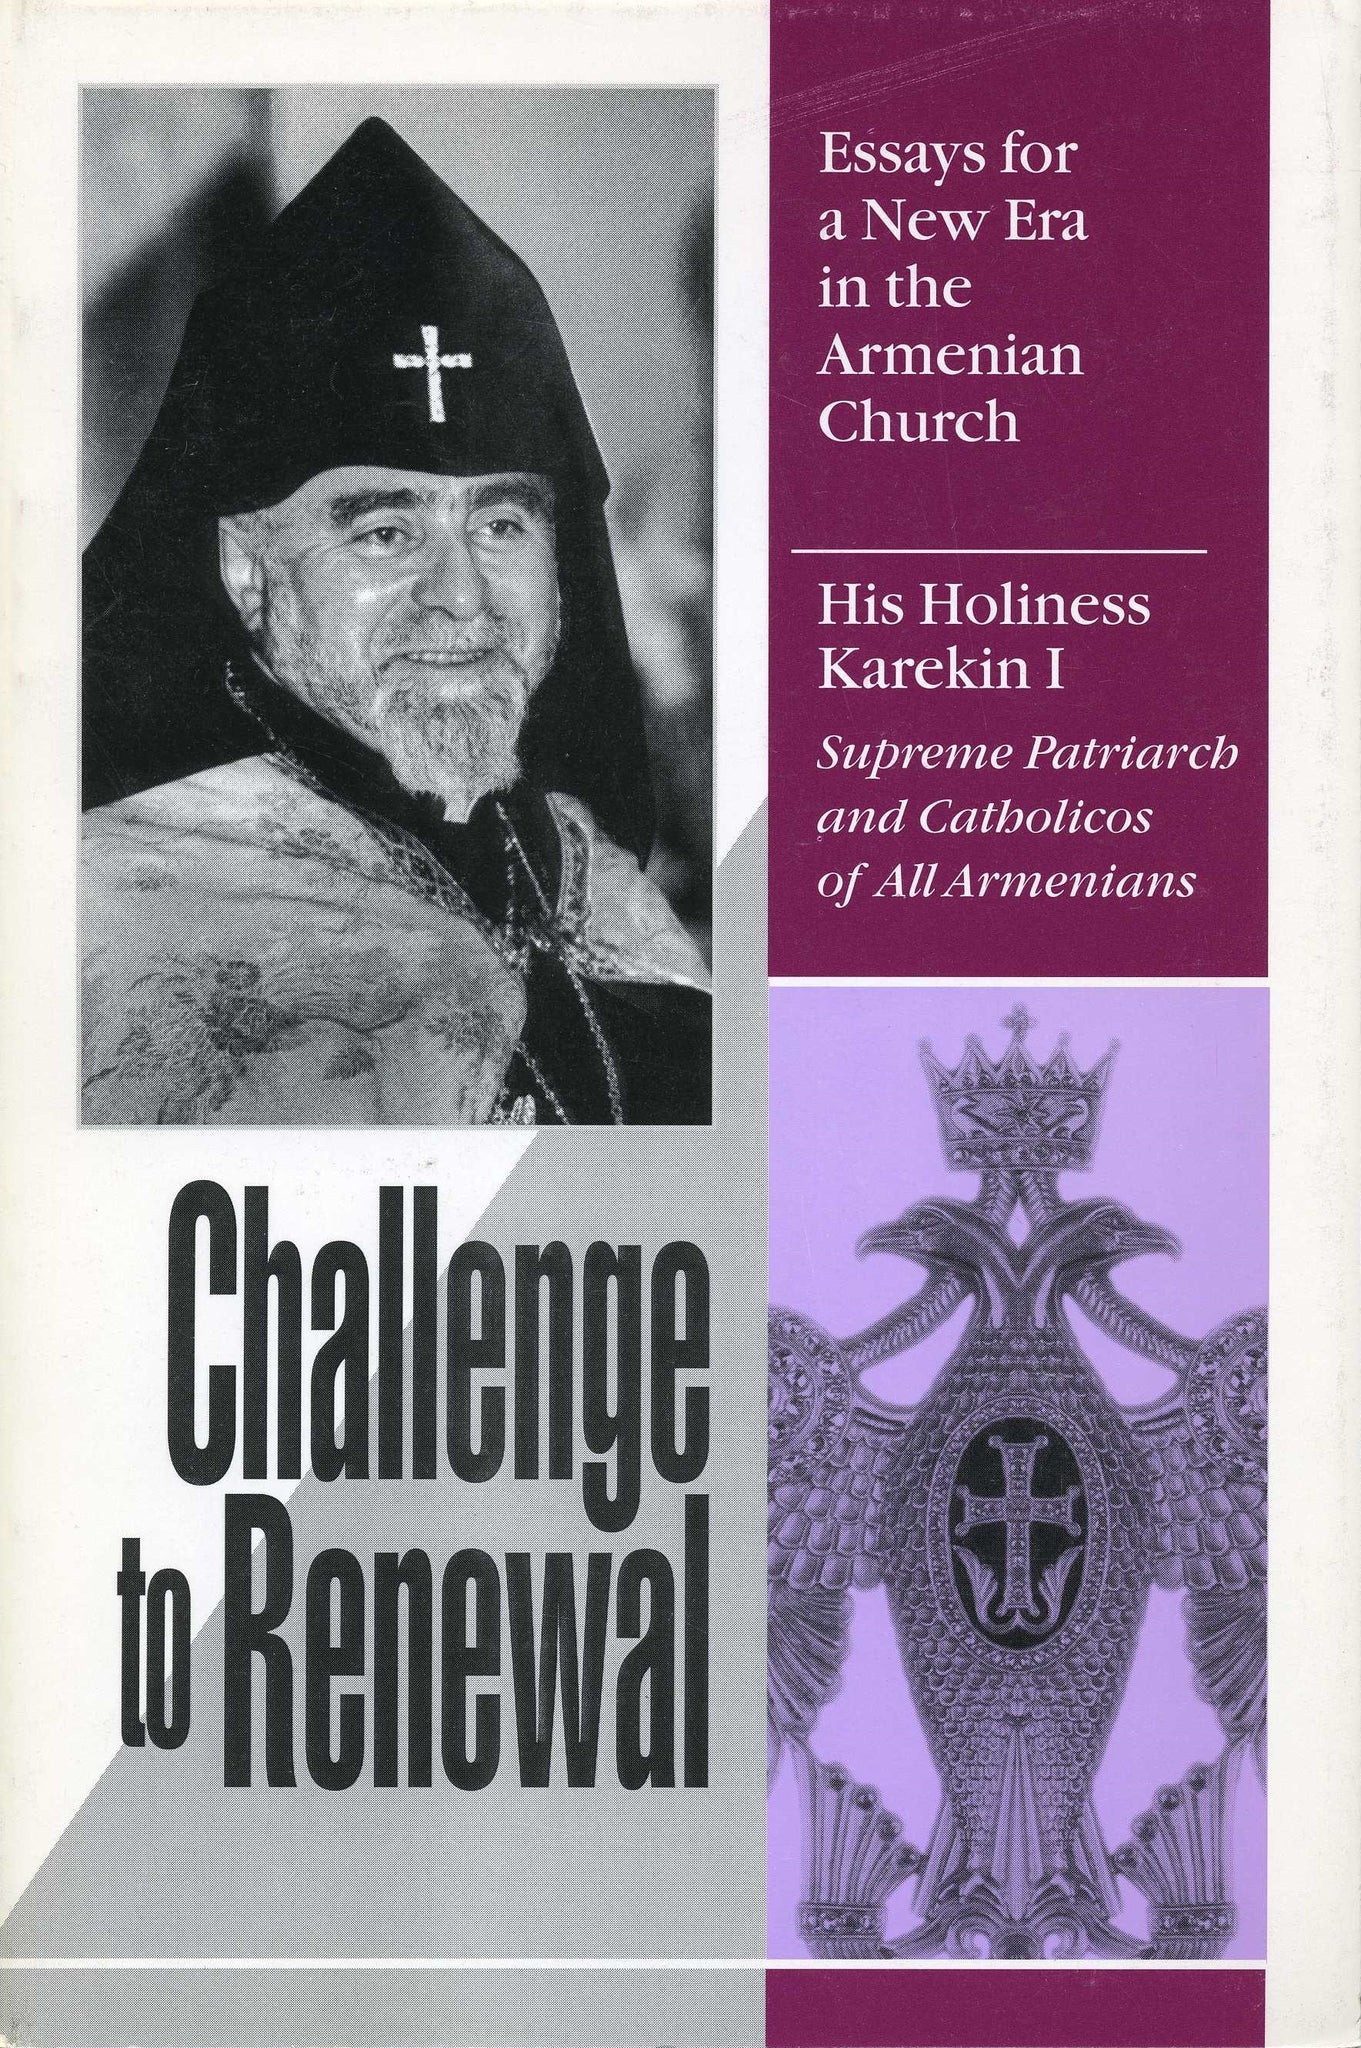 CHALLENGE TO RENEWAL: Essays for a New Era in the Armenian Church